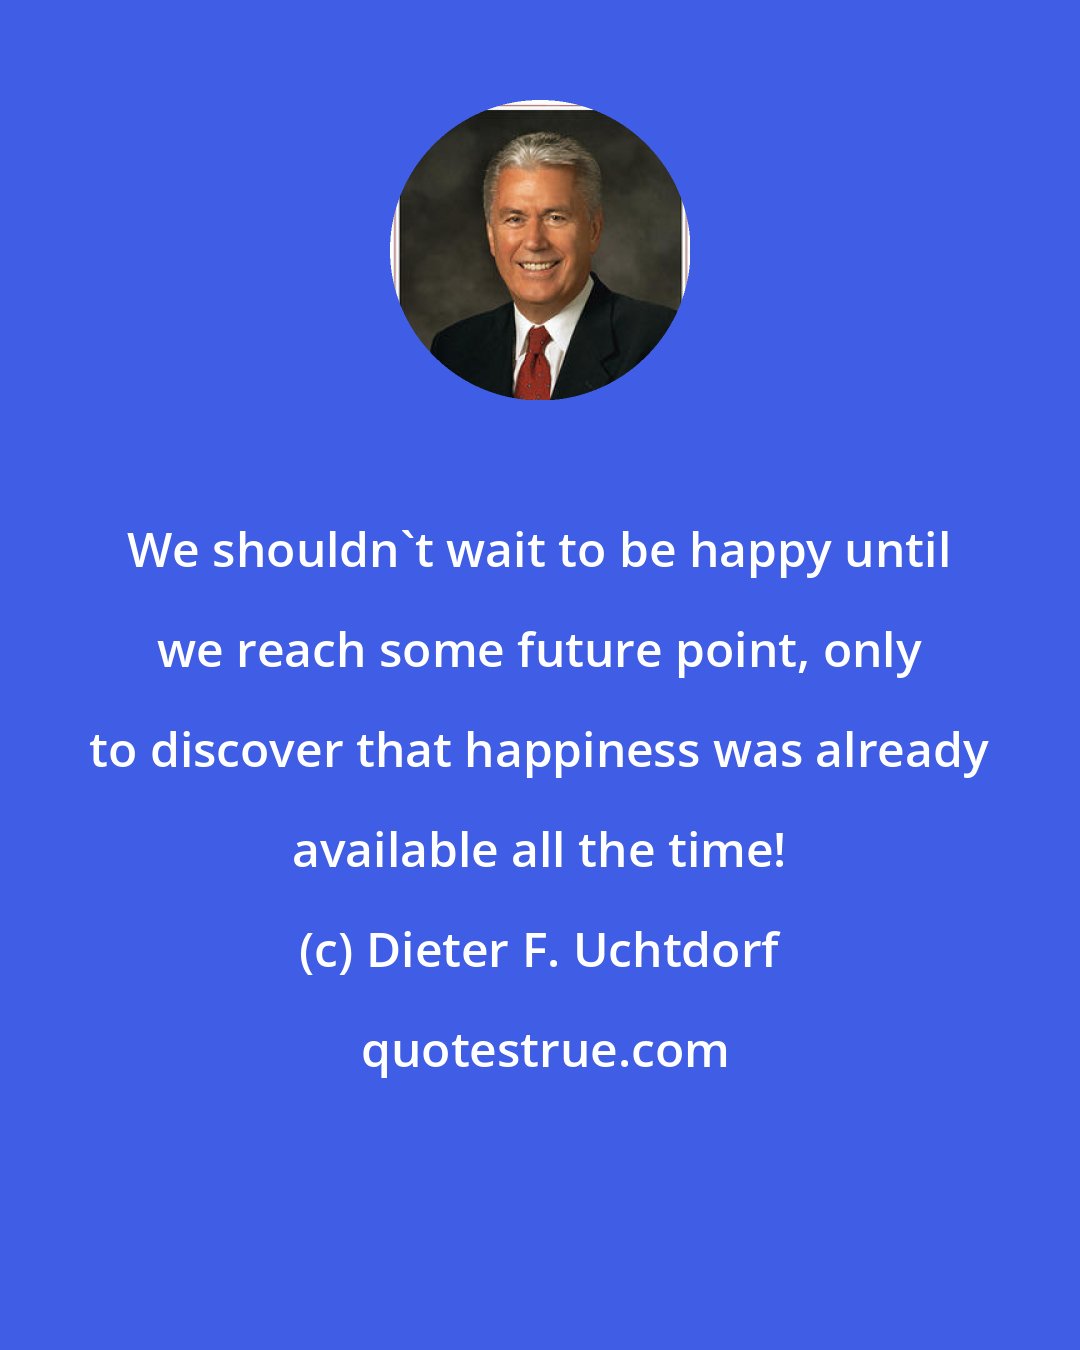 Dieter F. Uchtdorf: We shouldn't wait to be happy until we reach some future point, only to discover that happiness was already available all the time!